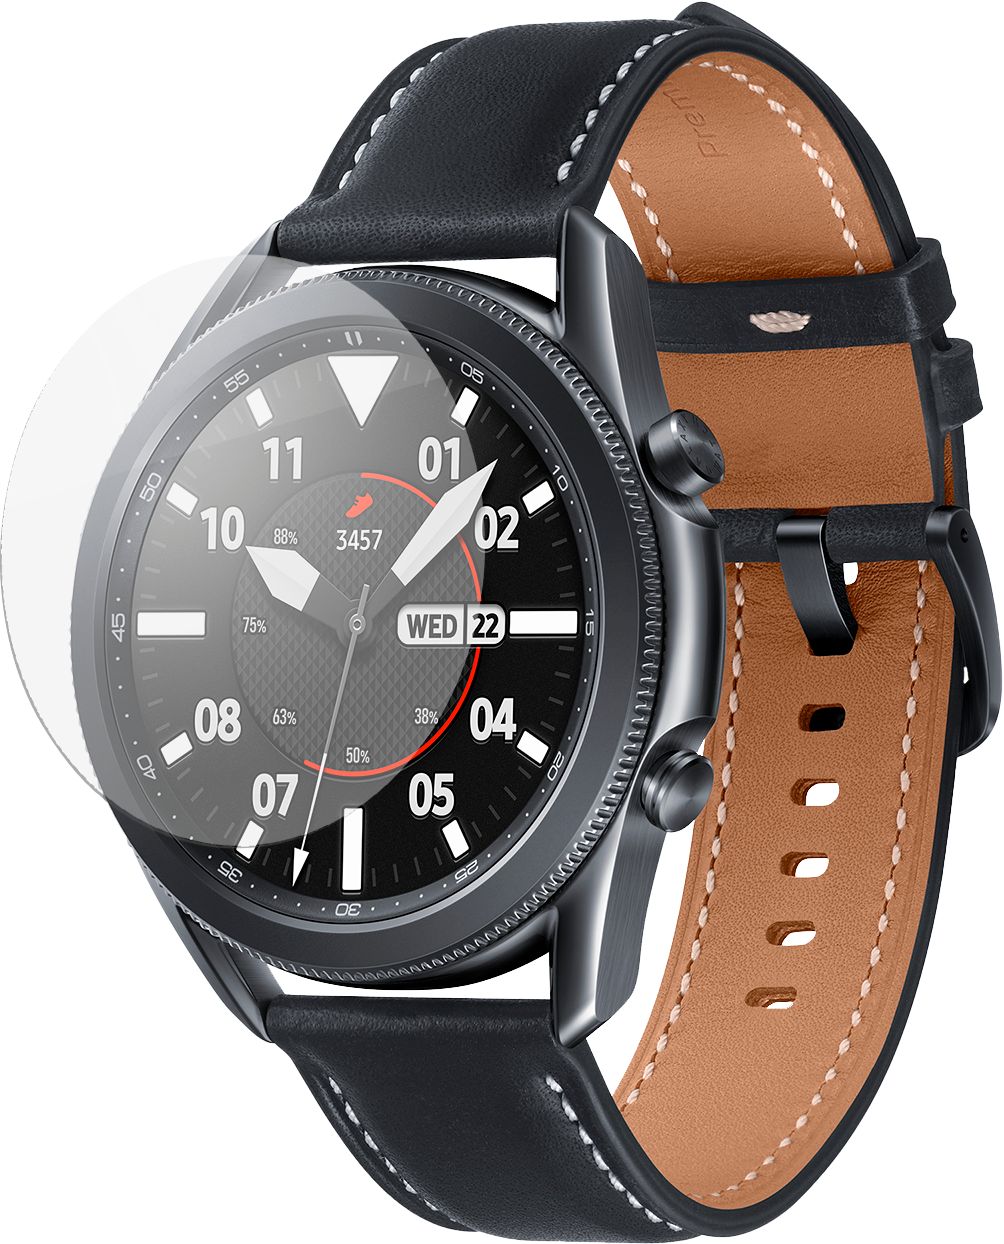 Angle View: ZAGG - InvisibleShield GlassFusion+ Flexible Hybrid Screen Protector for Samsung Galaxy Watch3 45mm